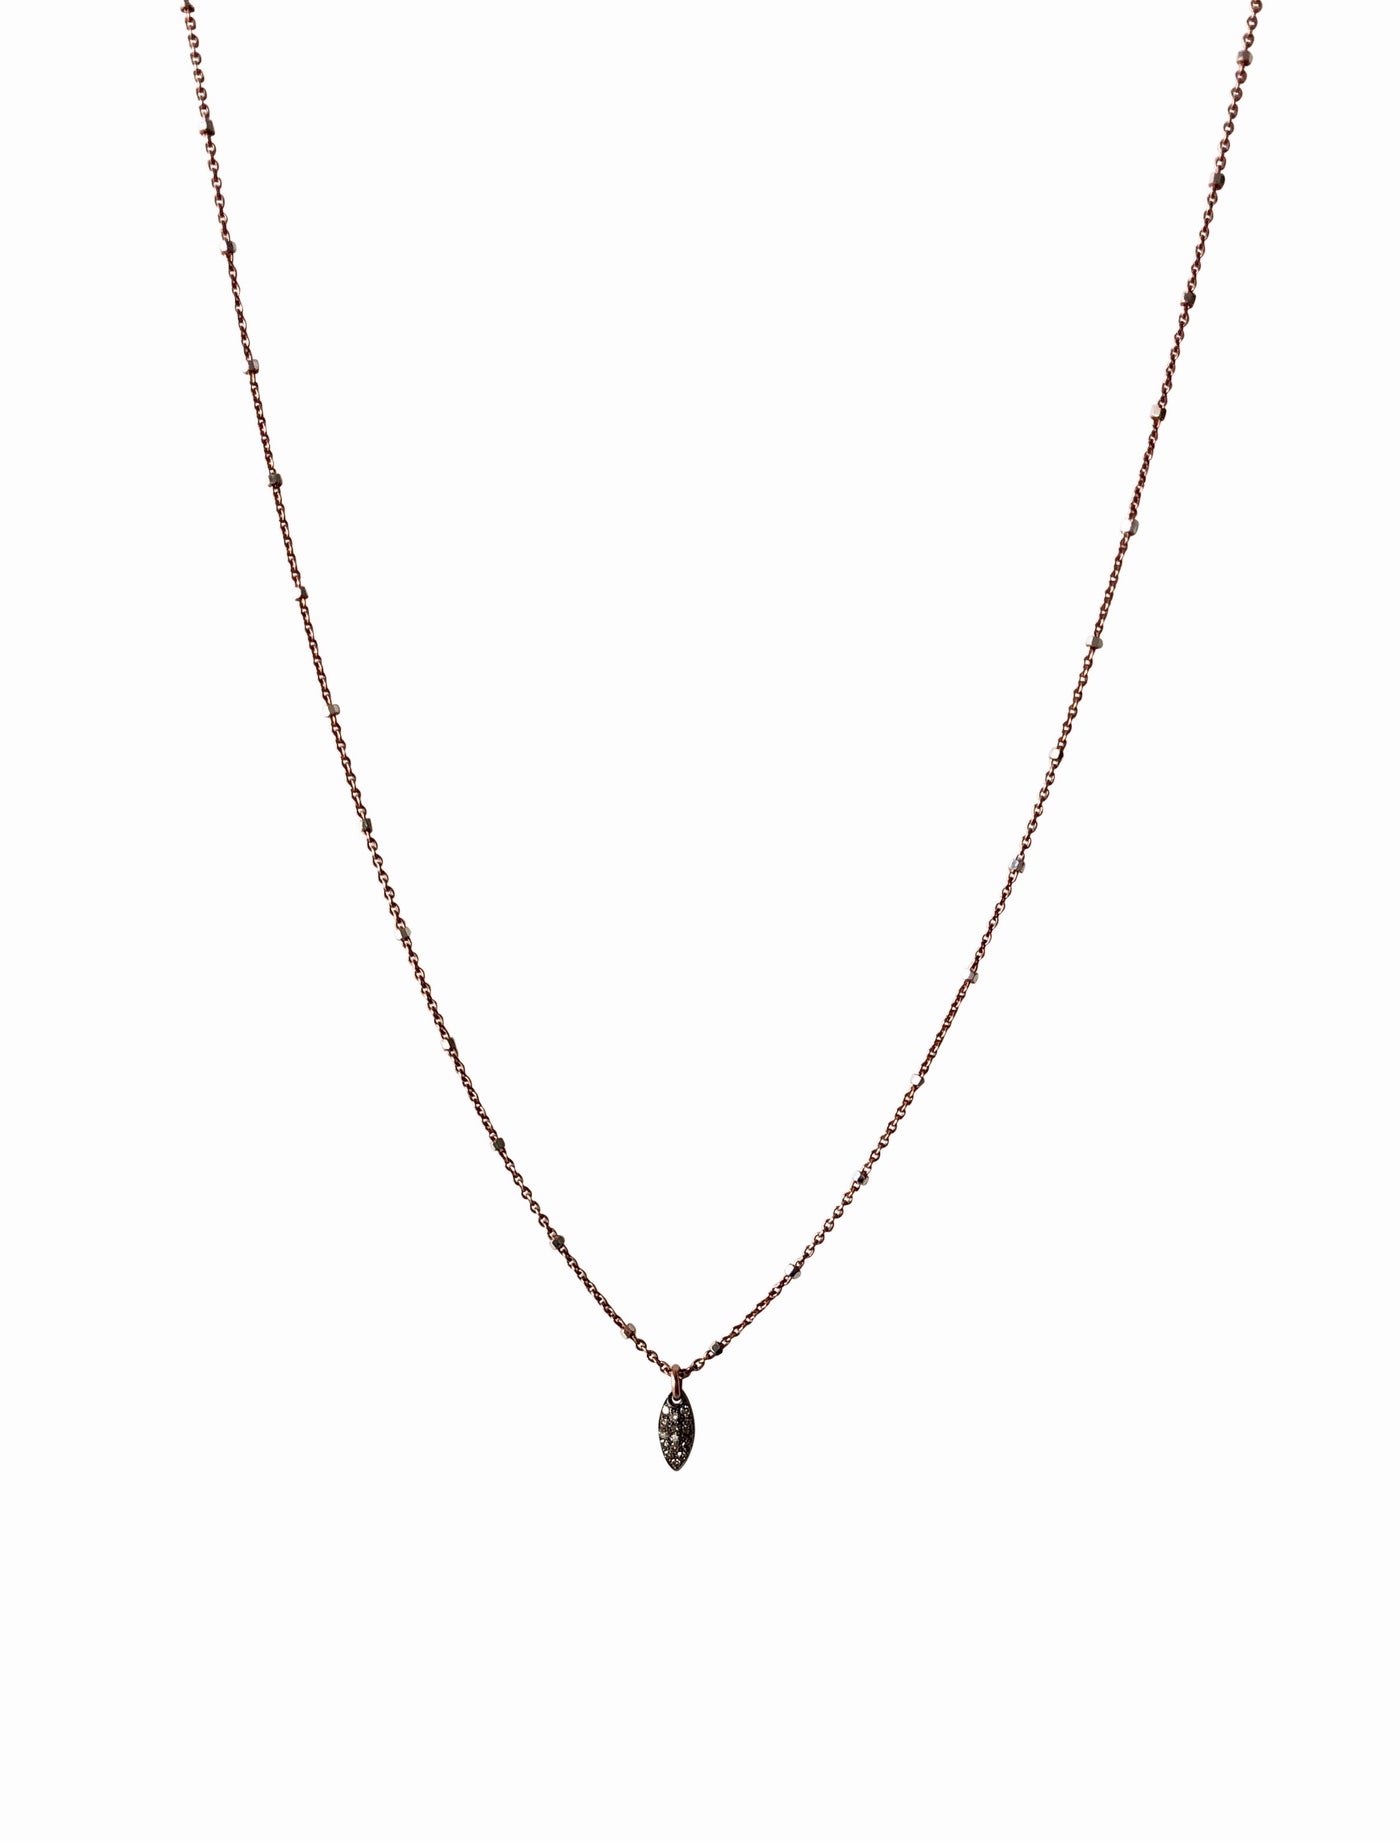 Pave Diamond Marquise Drop Charm Necklace | Rebecca Scott Jewelry | mixed metal jewelry | dainty necklace | made in usa | rose gold | feminine style